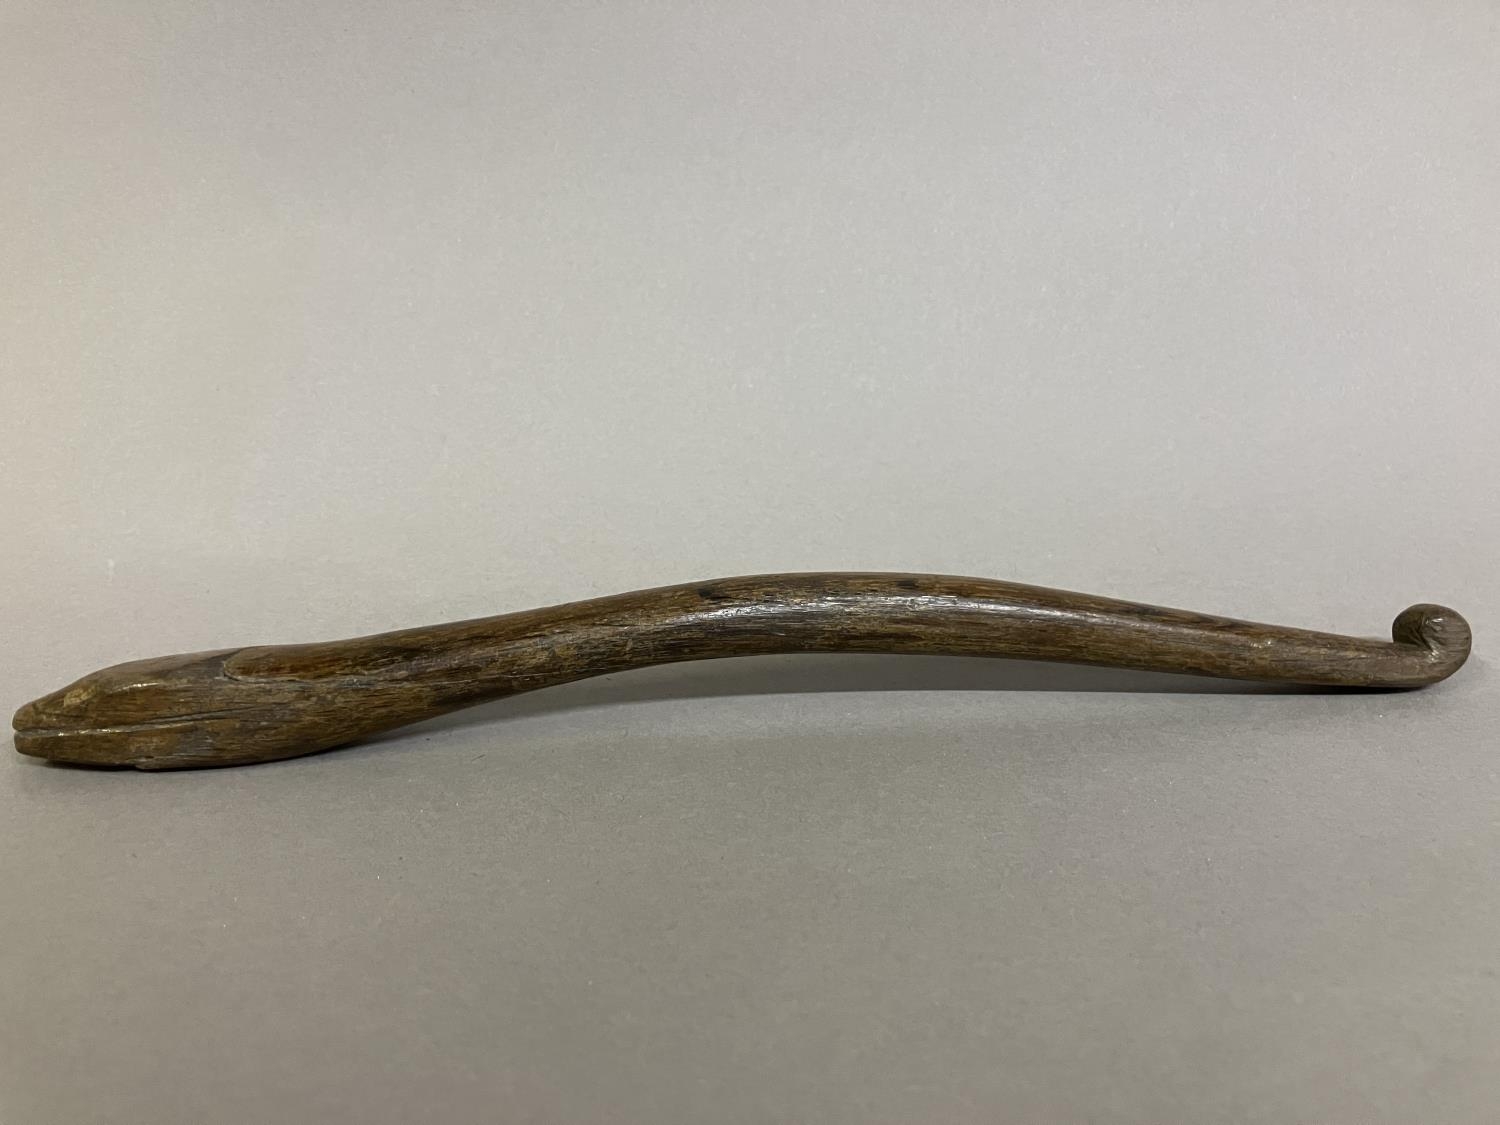 A 19th century wooden knitting stick, with a snake’s head, approx. 26.5cm (Shipping category C) Good